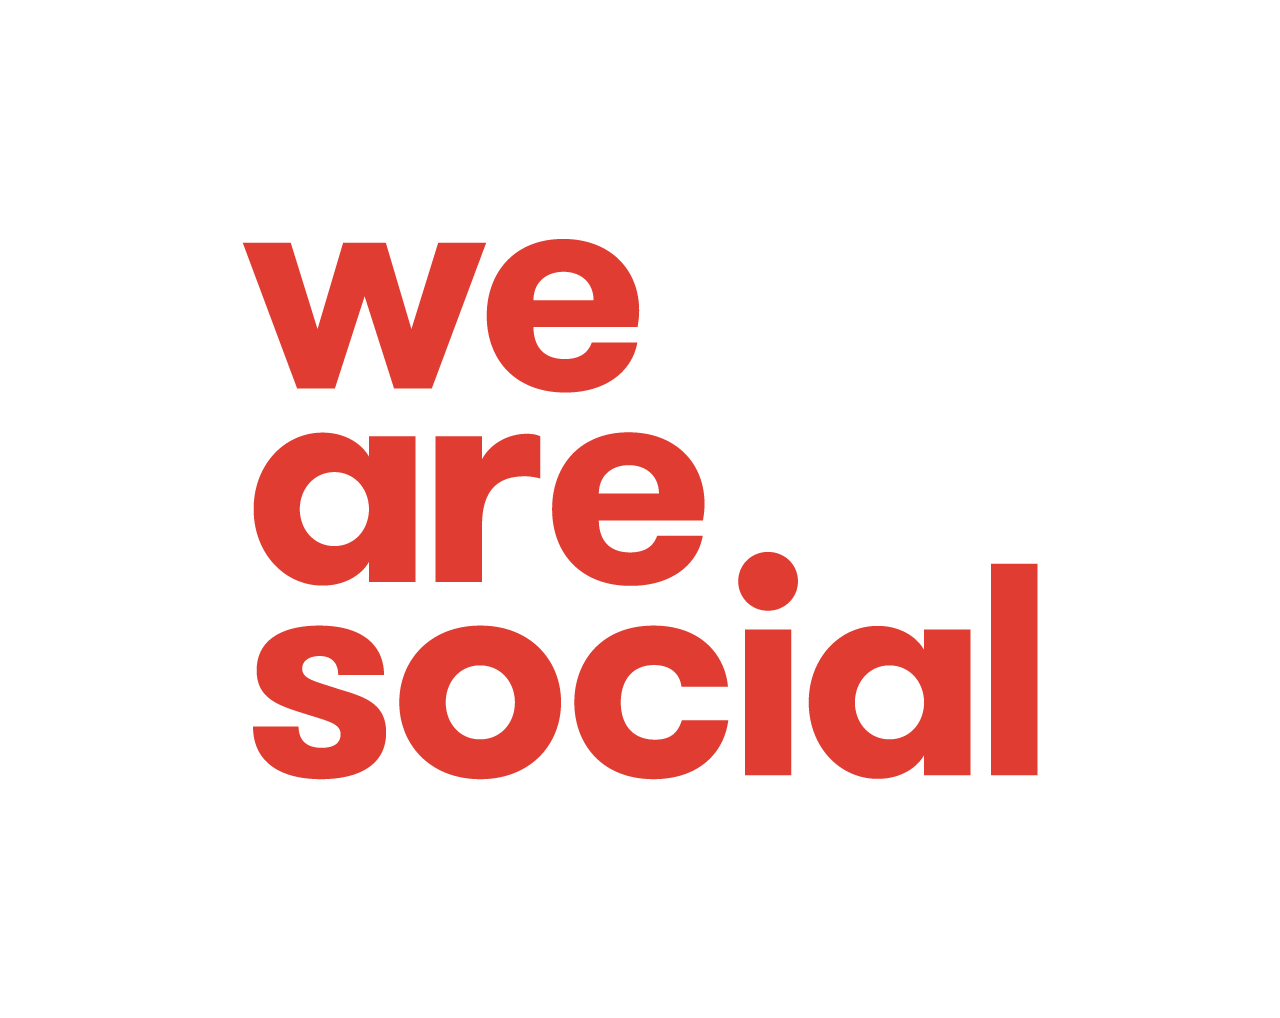 Soical Logo - We Are Social UK